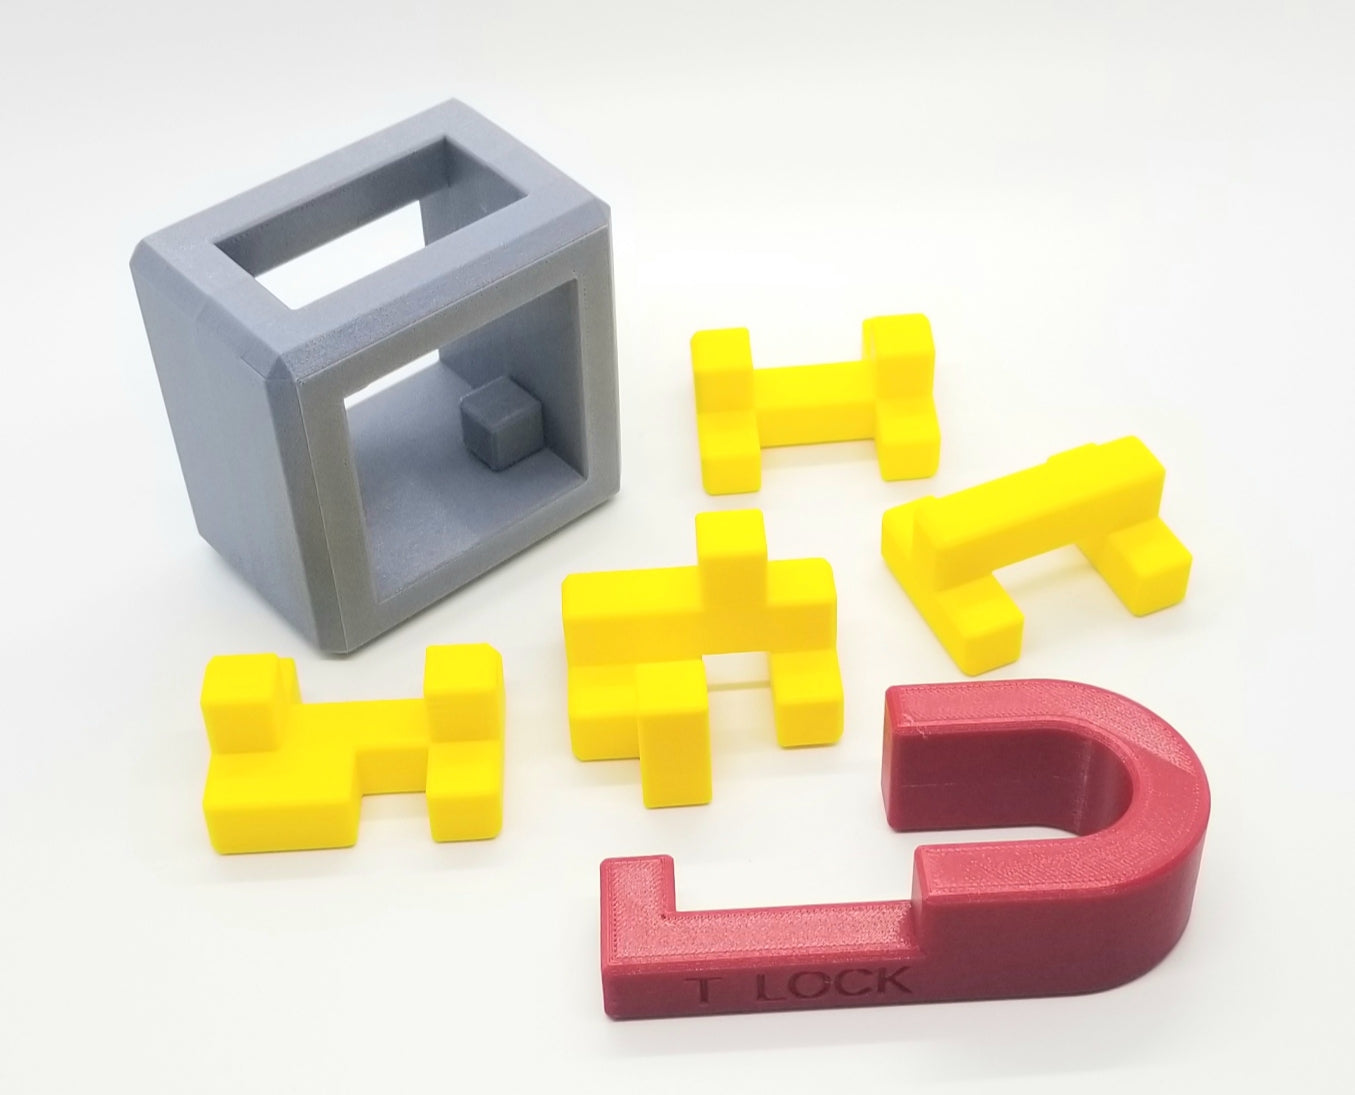 T Lock - 3D Printed Puzzle Lock with Rotations